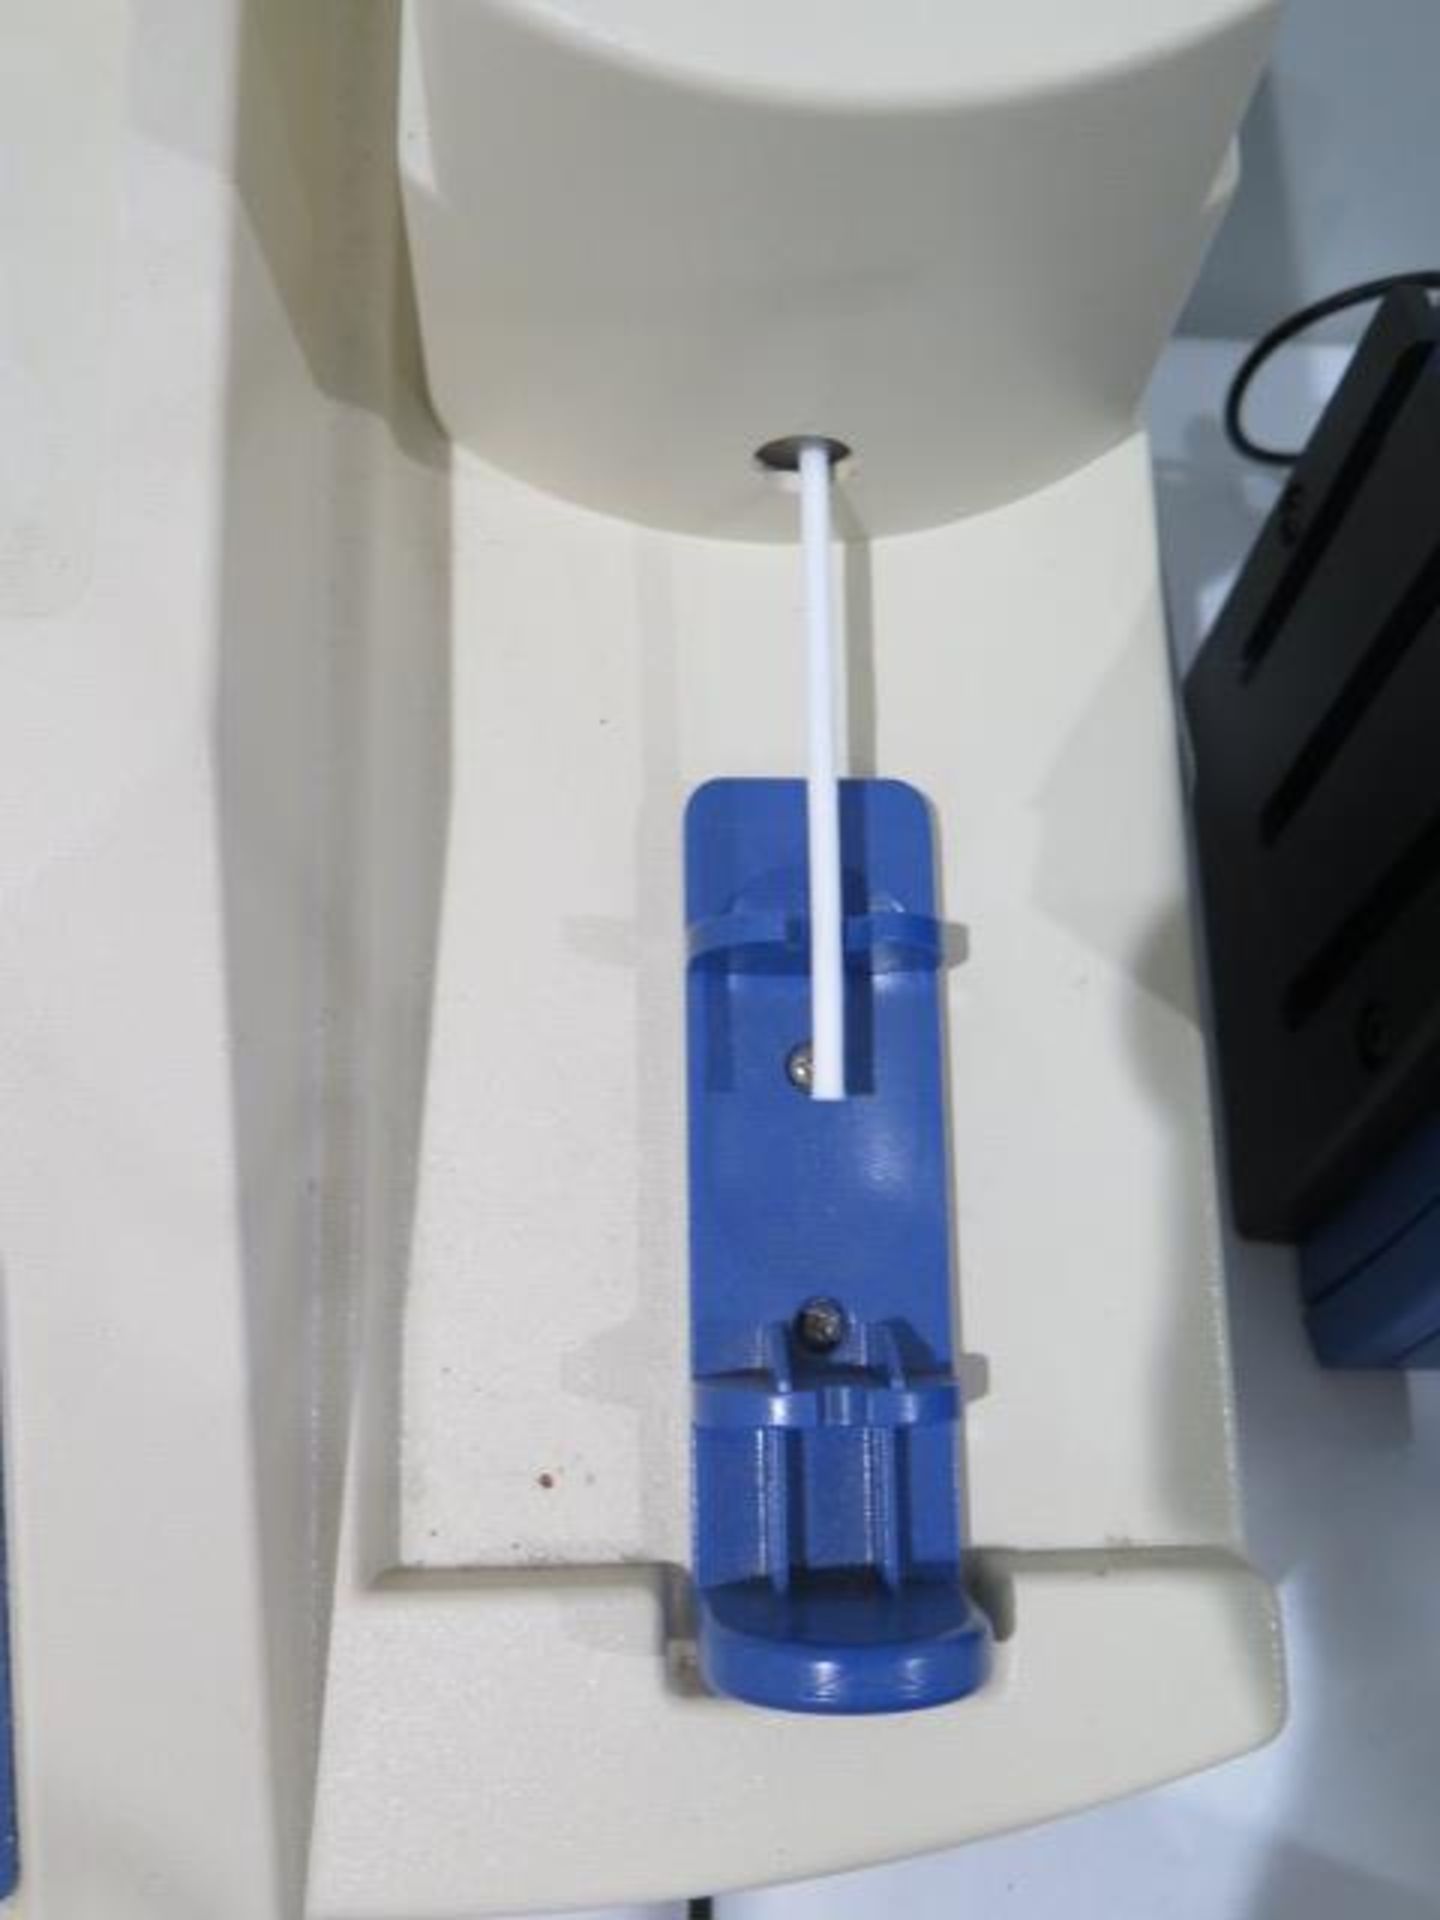 Advanced Instruments mdl. 3220 Osmometer s/n 06040381A (SOLD AS-IS - NO WARRANTY) - Image 4 of 7